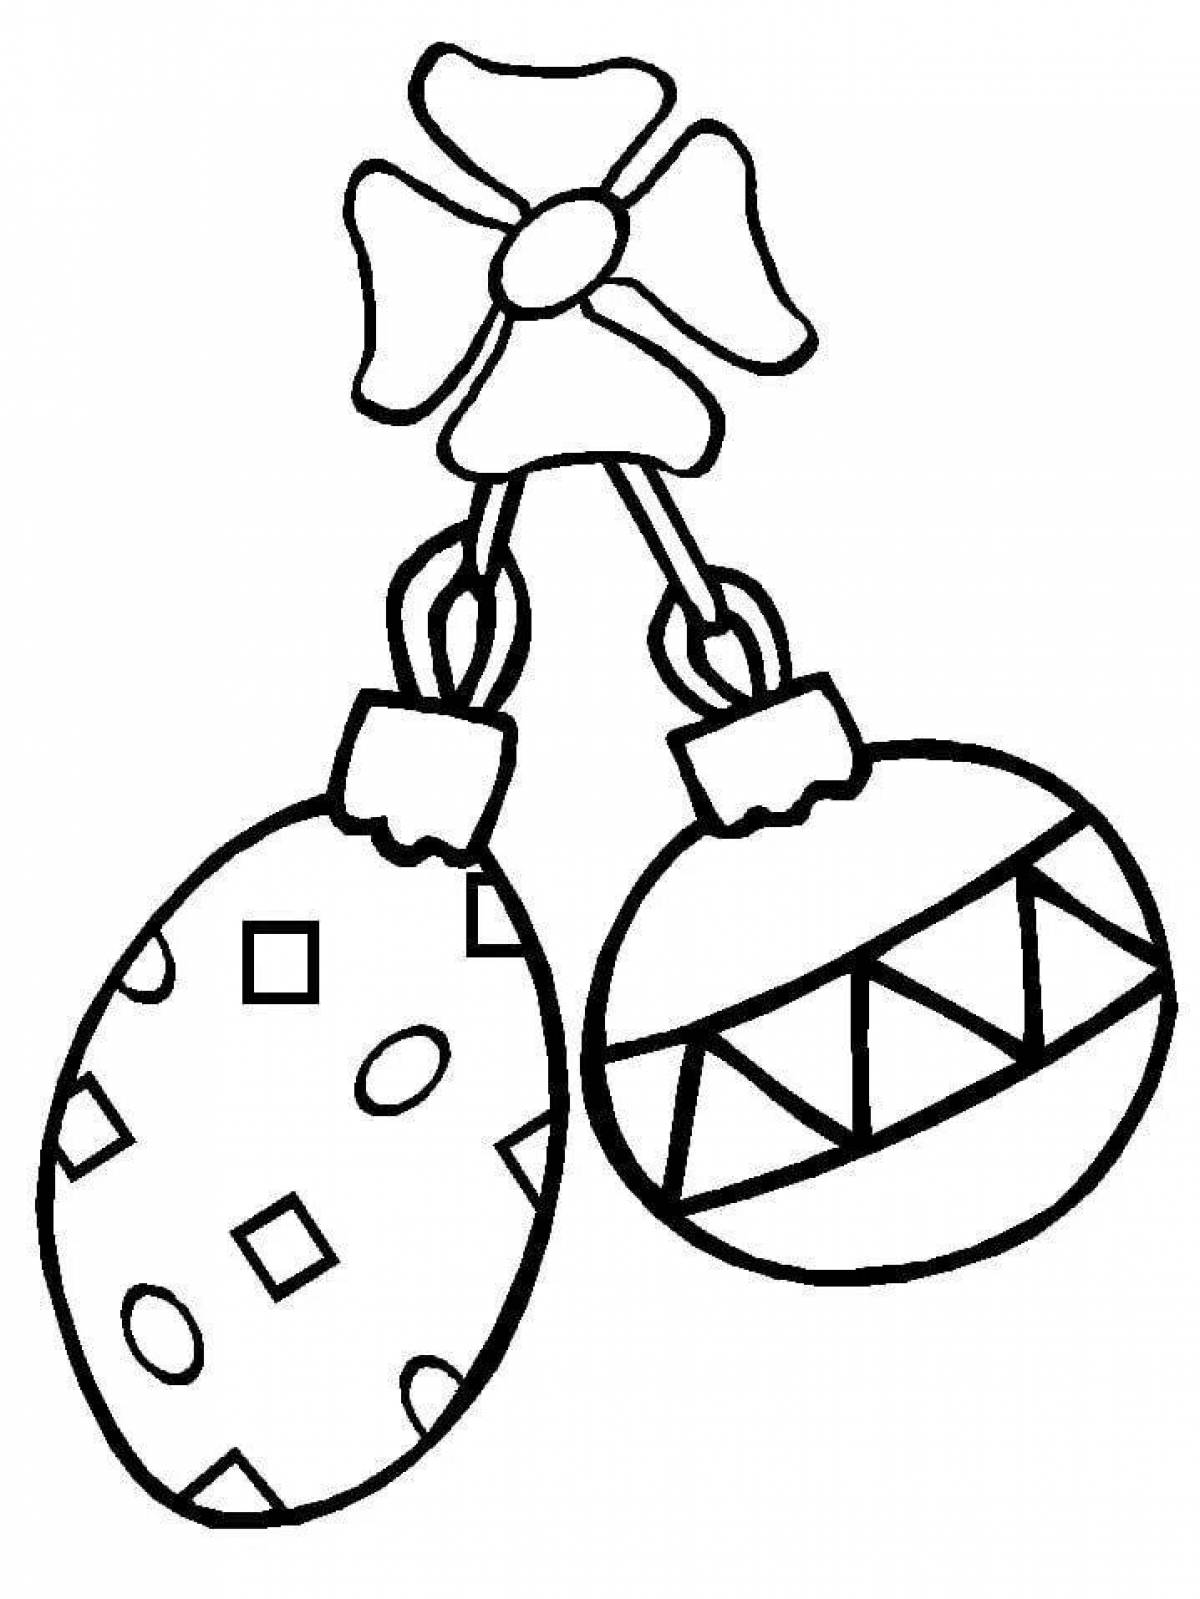 Coloring book shining Christmas decorations